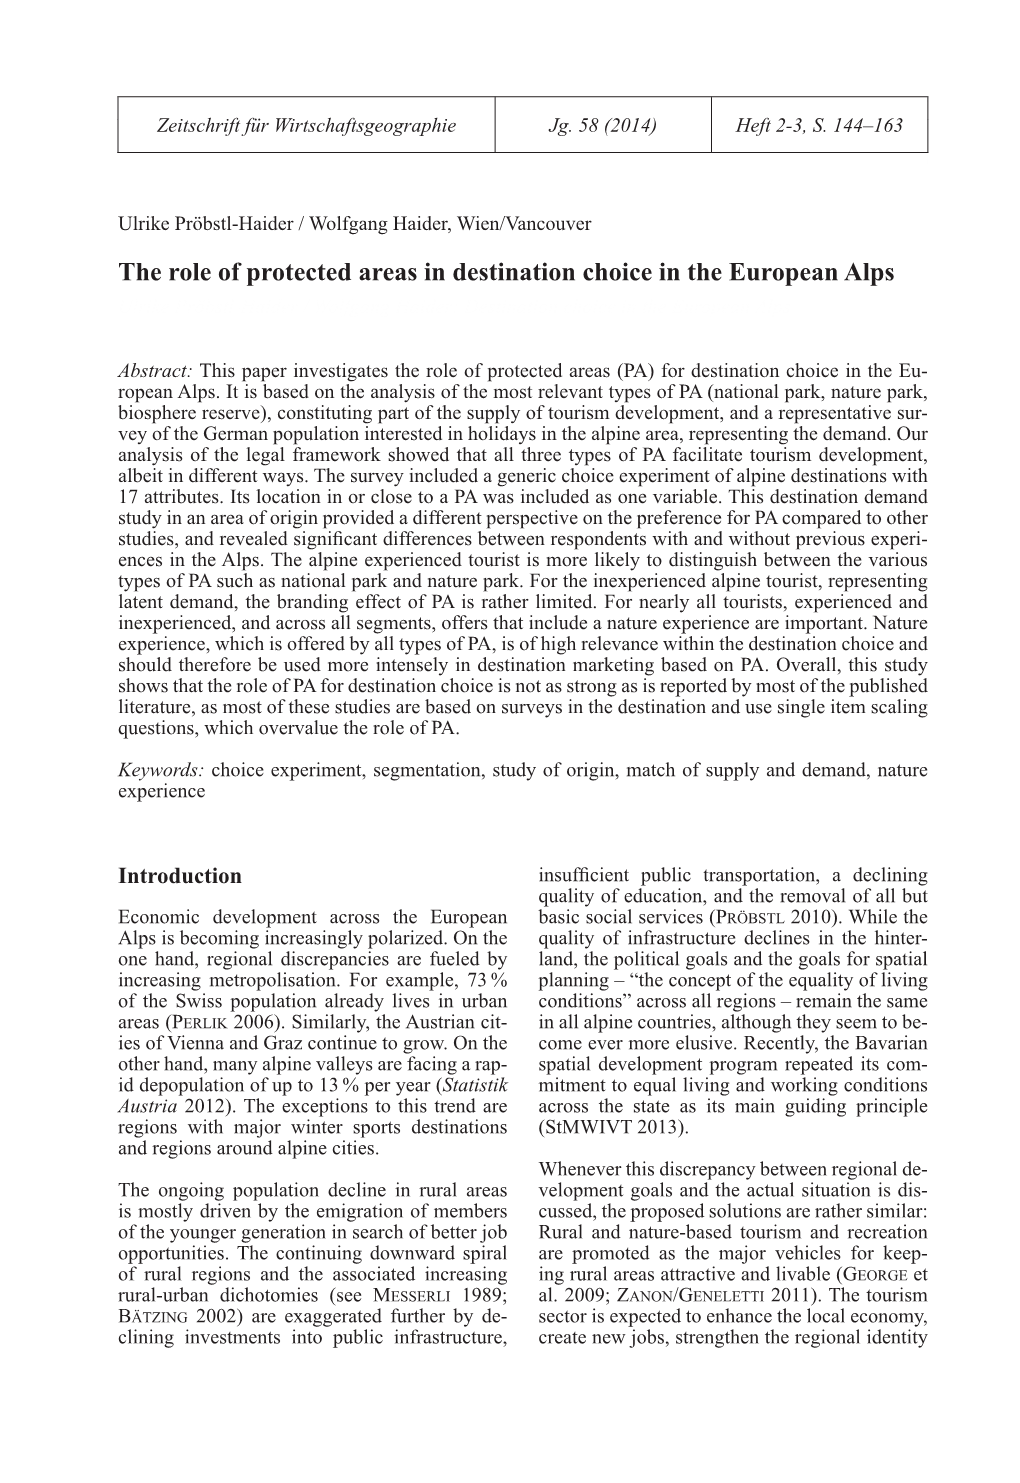 The Role of Protected Areas in Destination Choice in the European Alps Ulrike Pröbstl-Haider / Wolfgang Haider: Destination Choice in the European Alps